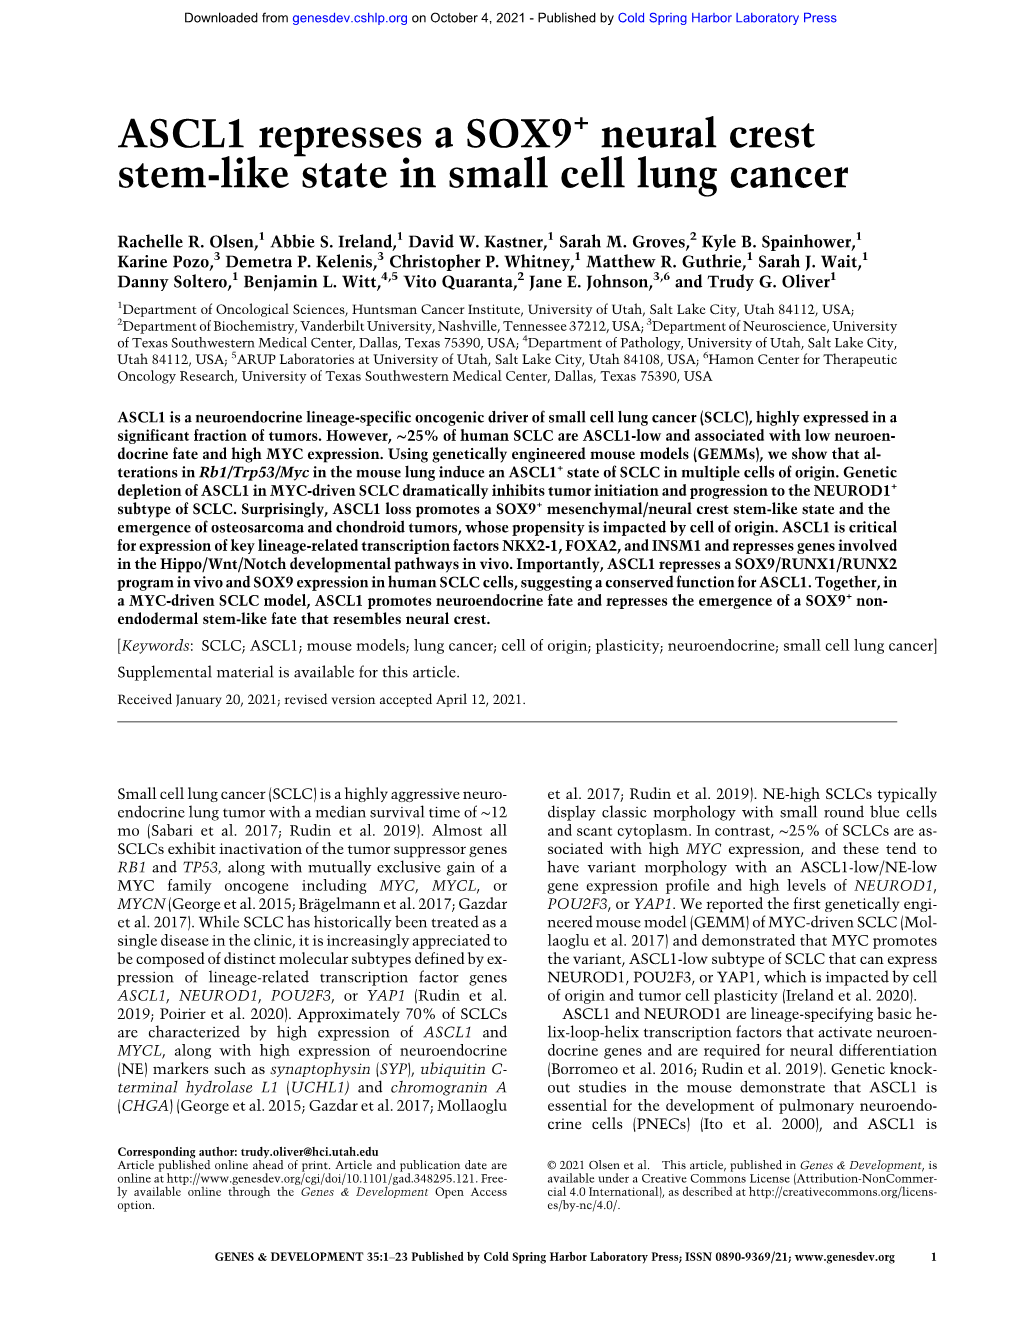 Neural Crest Stem-Like State in Small Cell Lung Cancer